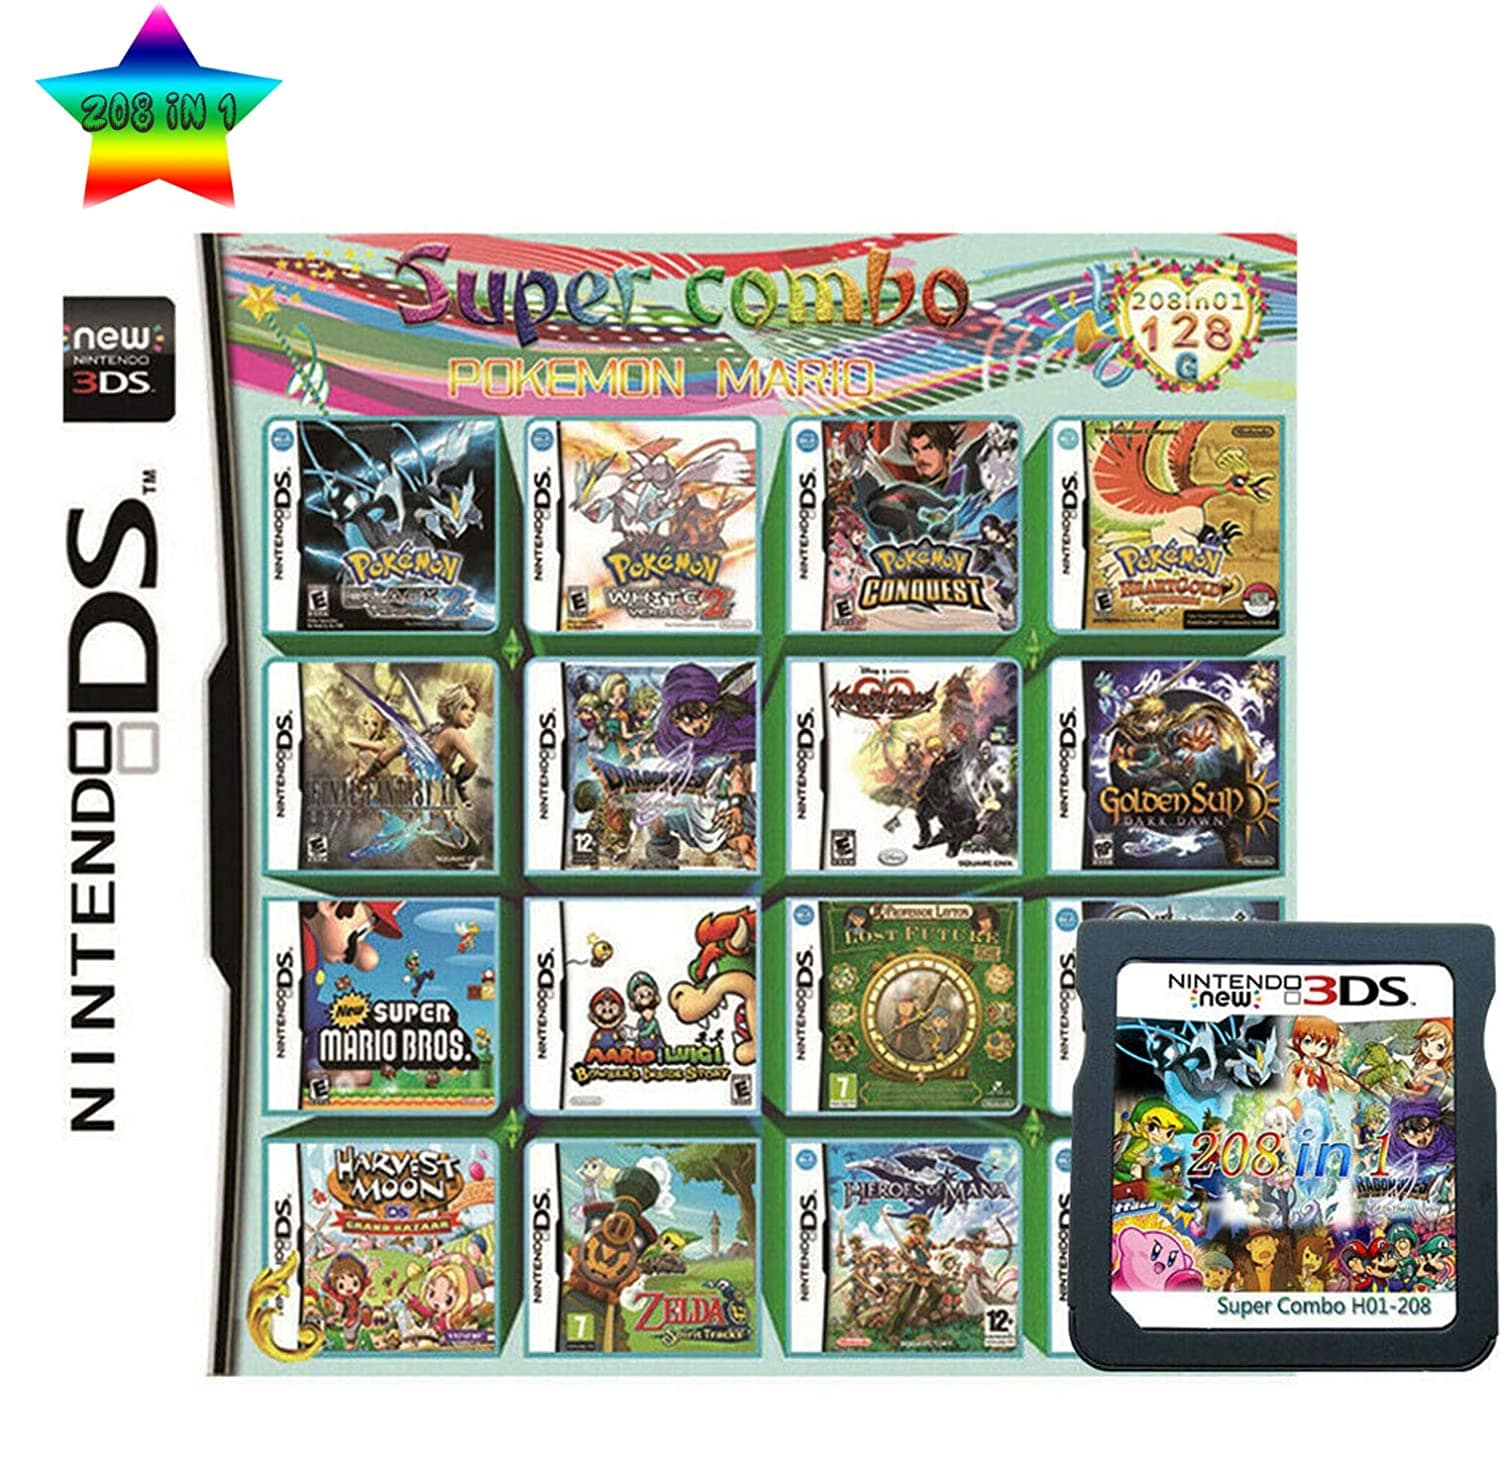 Luik Keelholte Redelijk Buy 208 In 1 Video Game Compilation Card For Nintendo DS/3DS/2DS Console Nintendo  3DS - Cheap - G2A.COM!